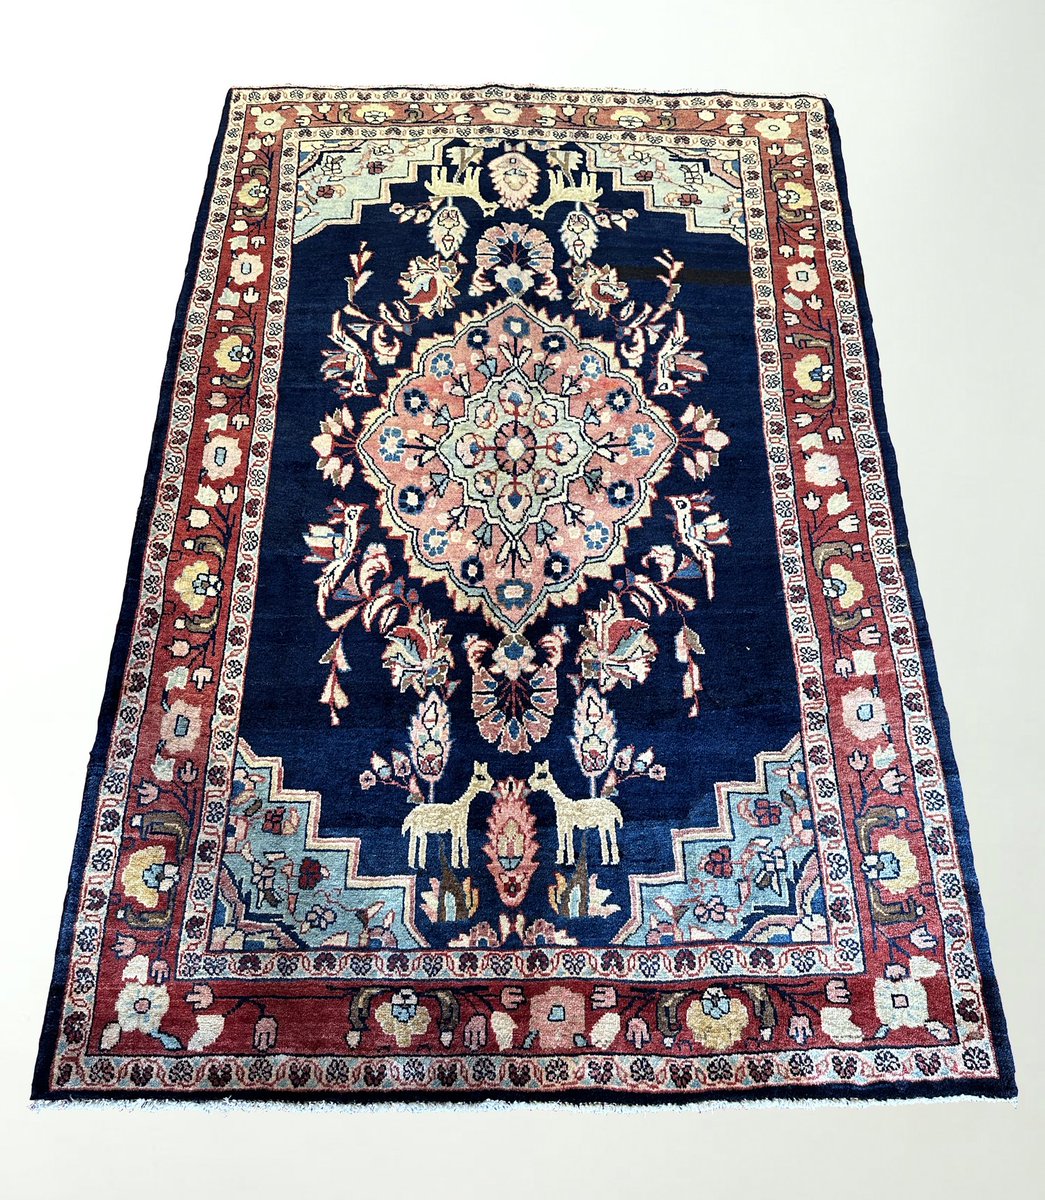 Take home this stunning Hamedan rug from the West of Persia and bring fauna & flora into your home Shop -> bit.ly/3O4yLTR #Stockbridge #Hampshire #shopsmall